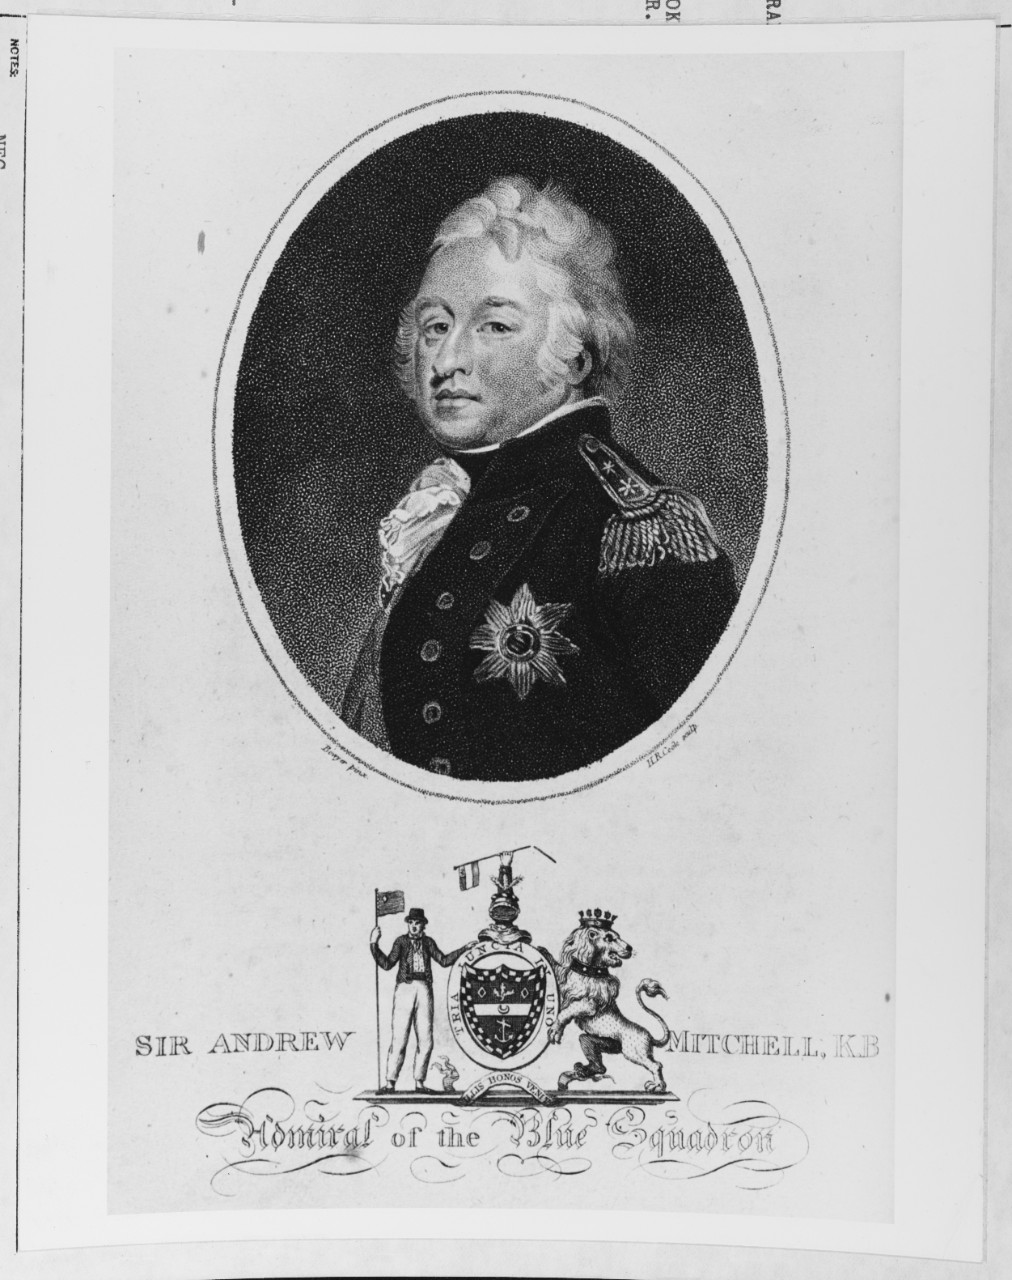 Sir Andrew Mitchell (1757 - 1806), English Admiral